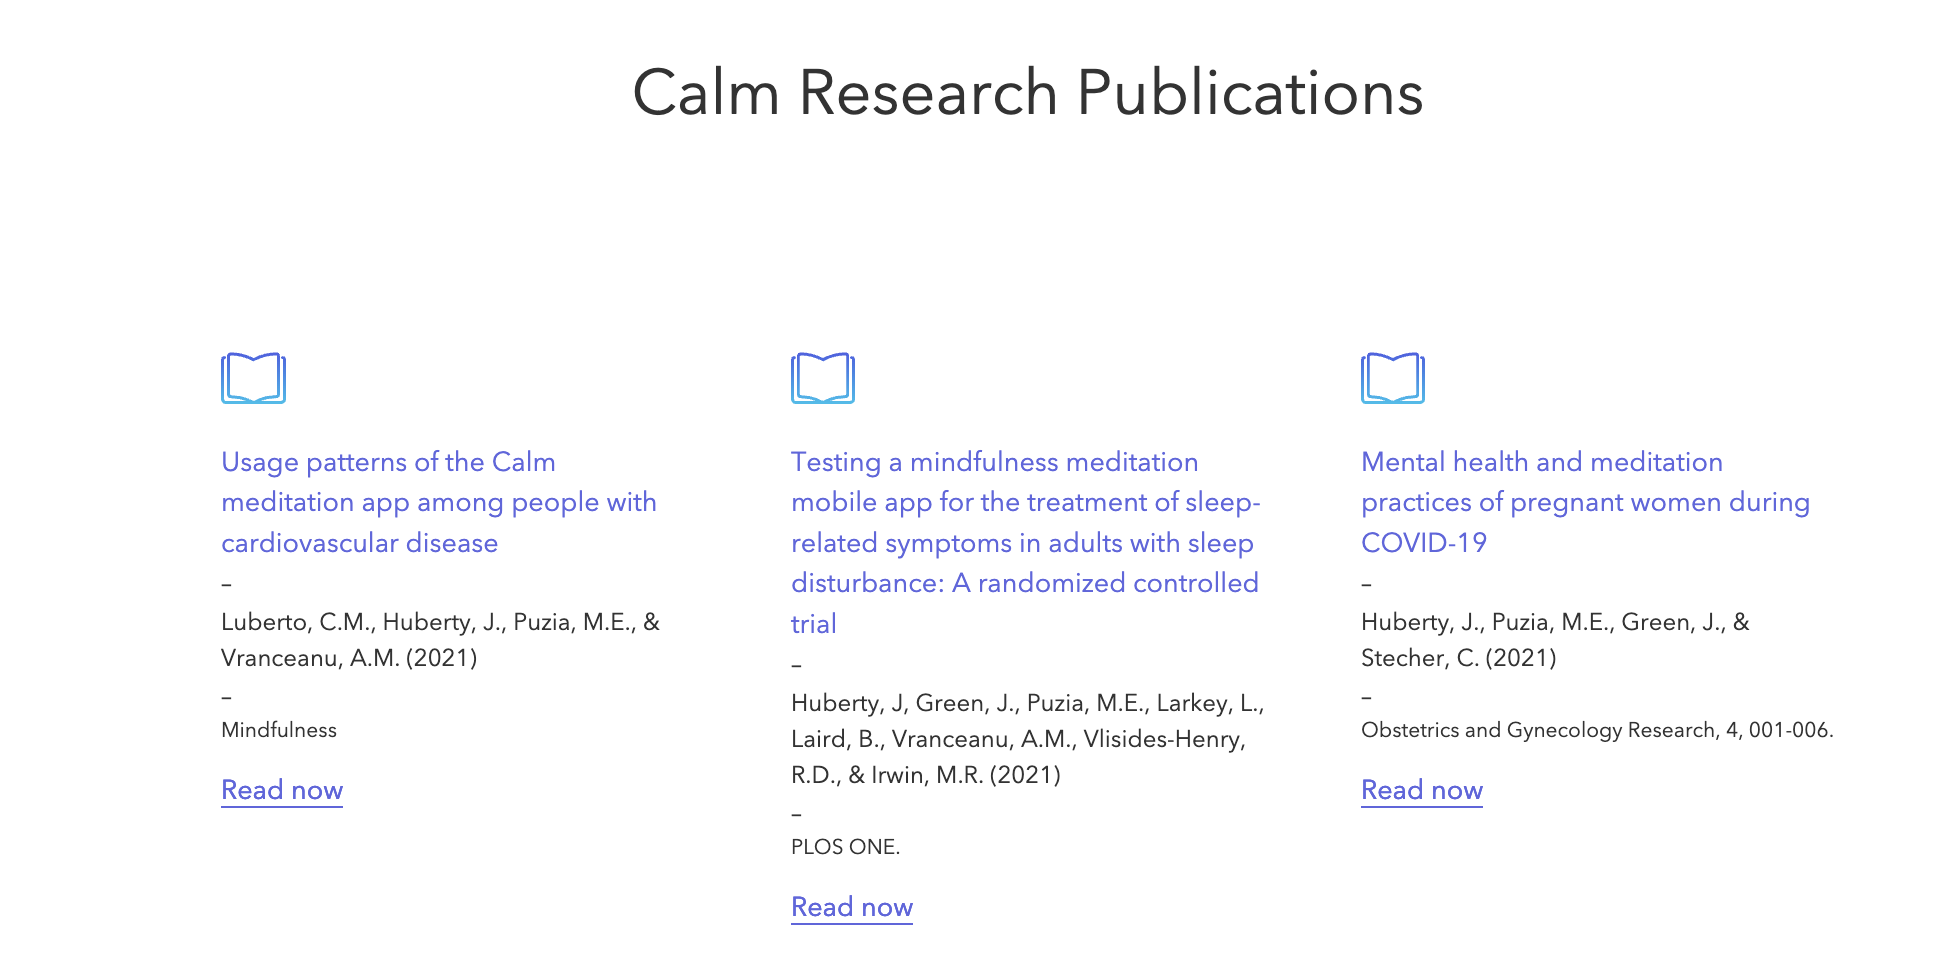 Research Publications for Calm